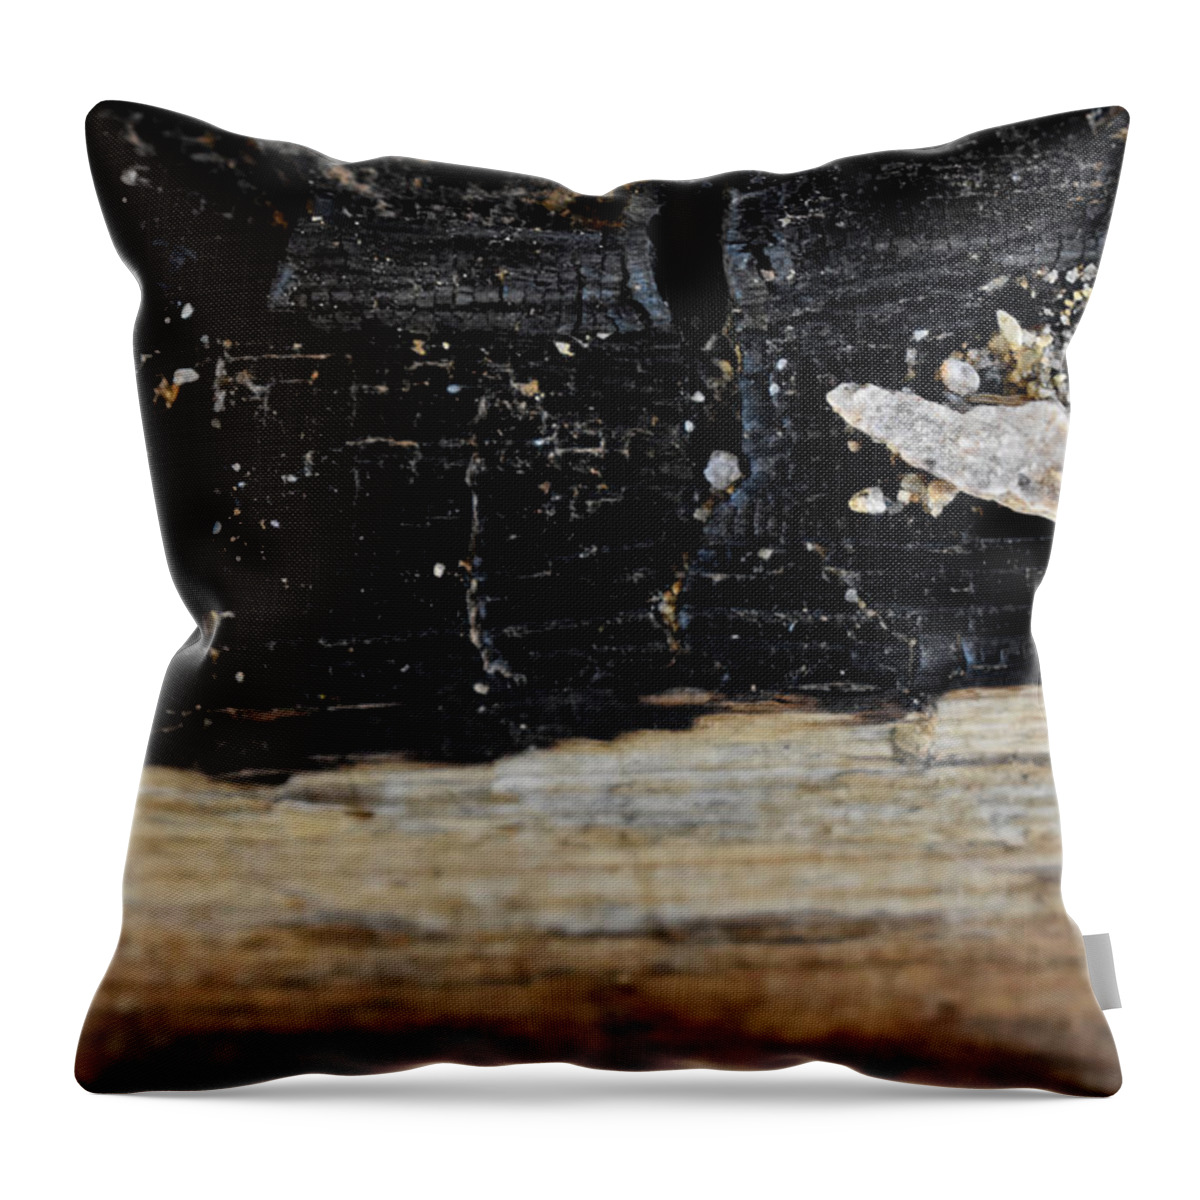 Black Throw Pillow featuring the photograph Texture by Melisa Elliott